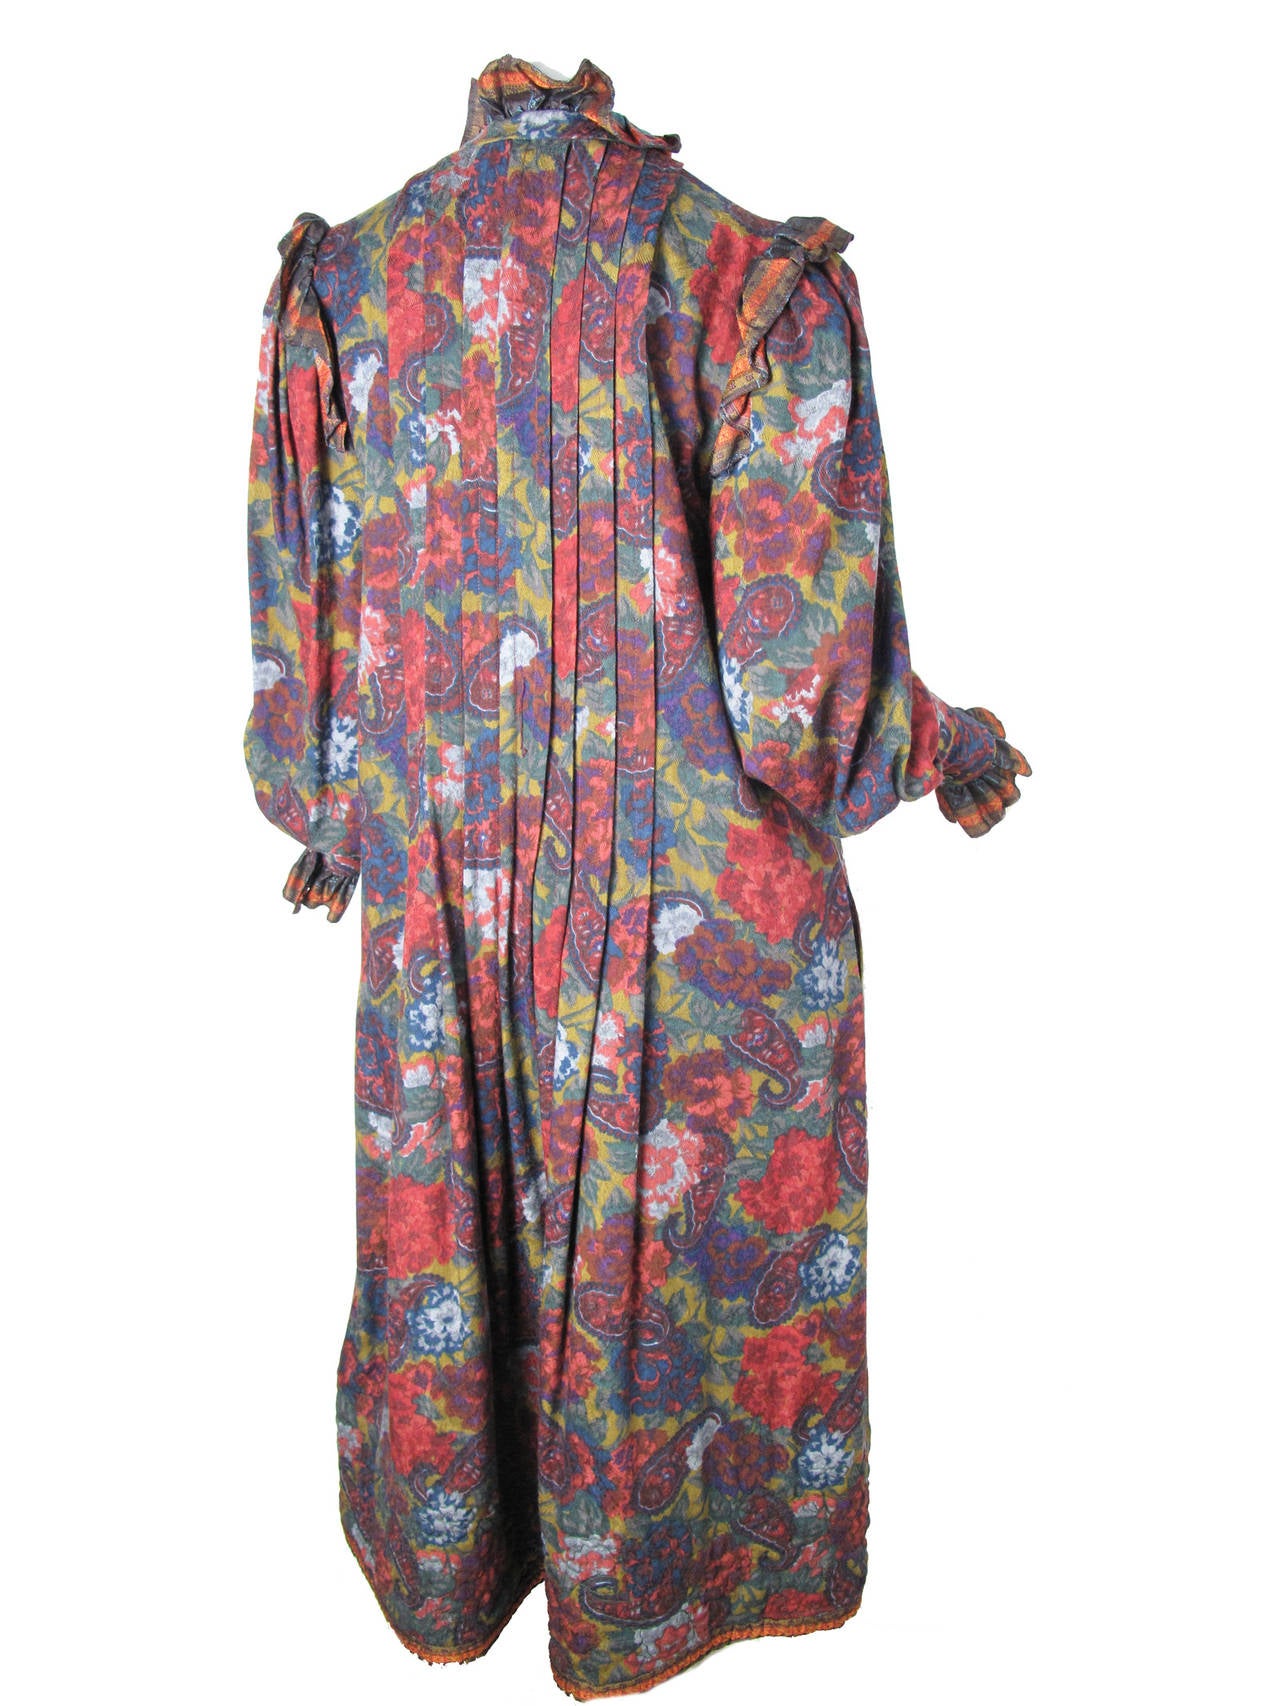 Oscar de la Renta floral wool peasant dress with ruffle collar and cuffs.  Quilting at hemline.  Pockets.  Has belt loops but missing belt.  Belt in photo does not come with dress. Condition: Very good. Size

38